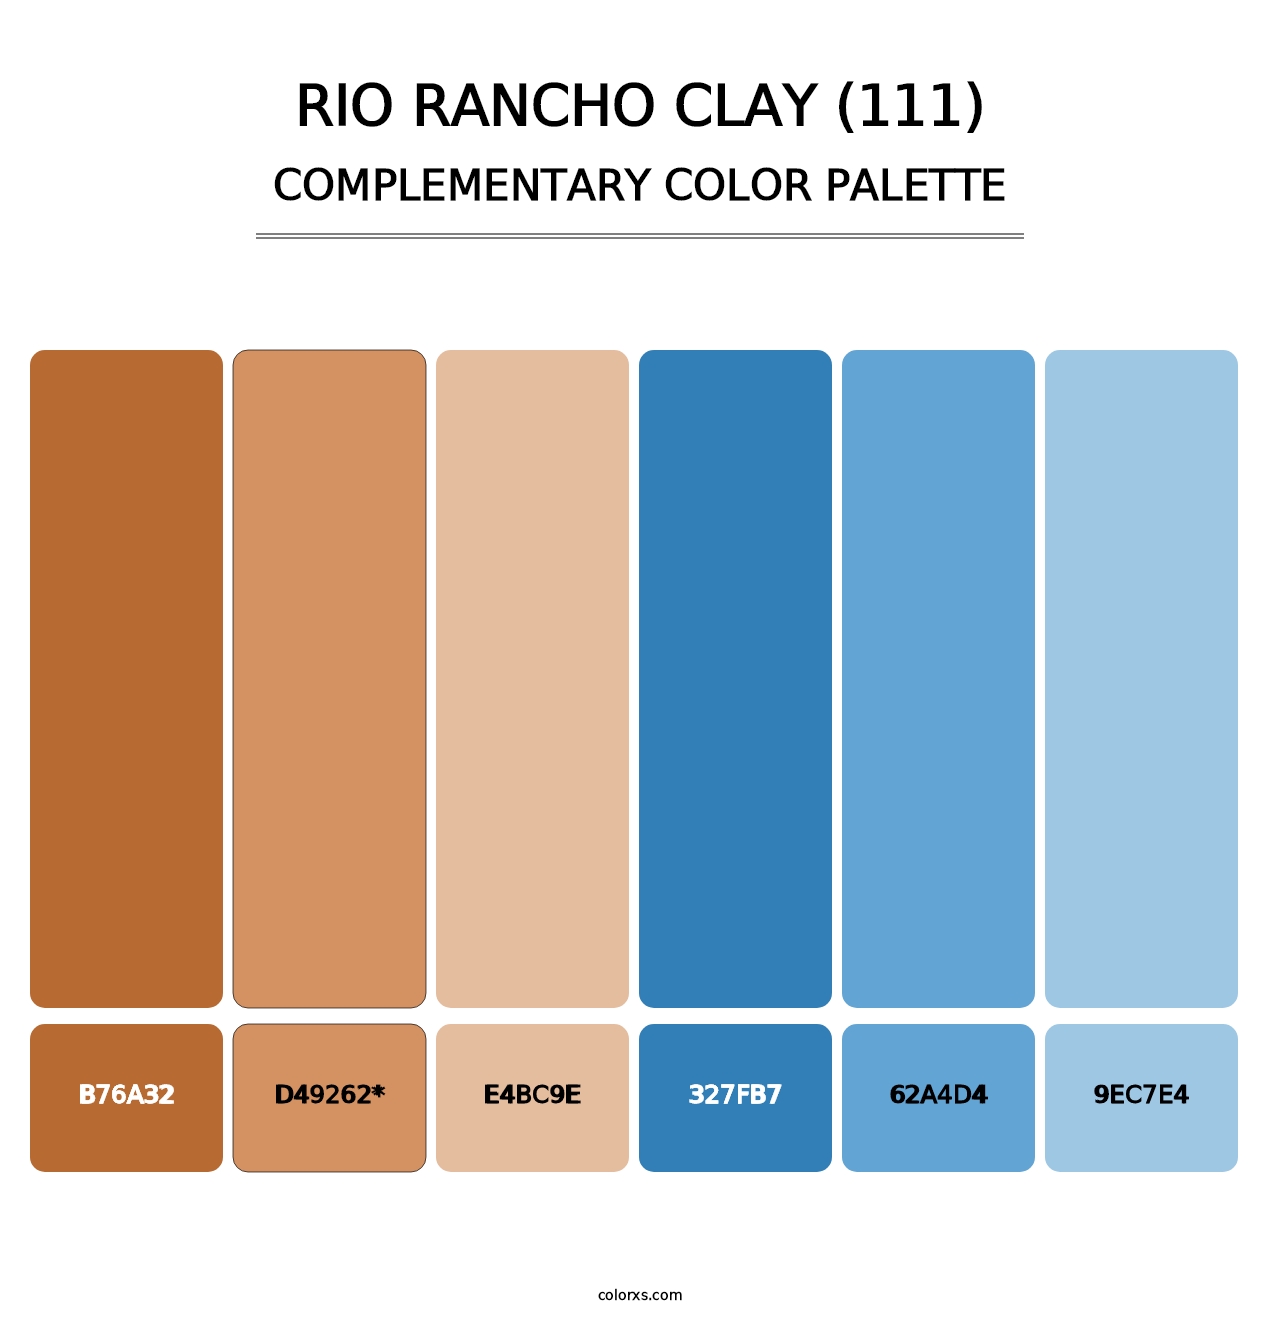 Rio Rancho Clay (111) - Complementary Color Palette